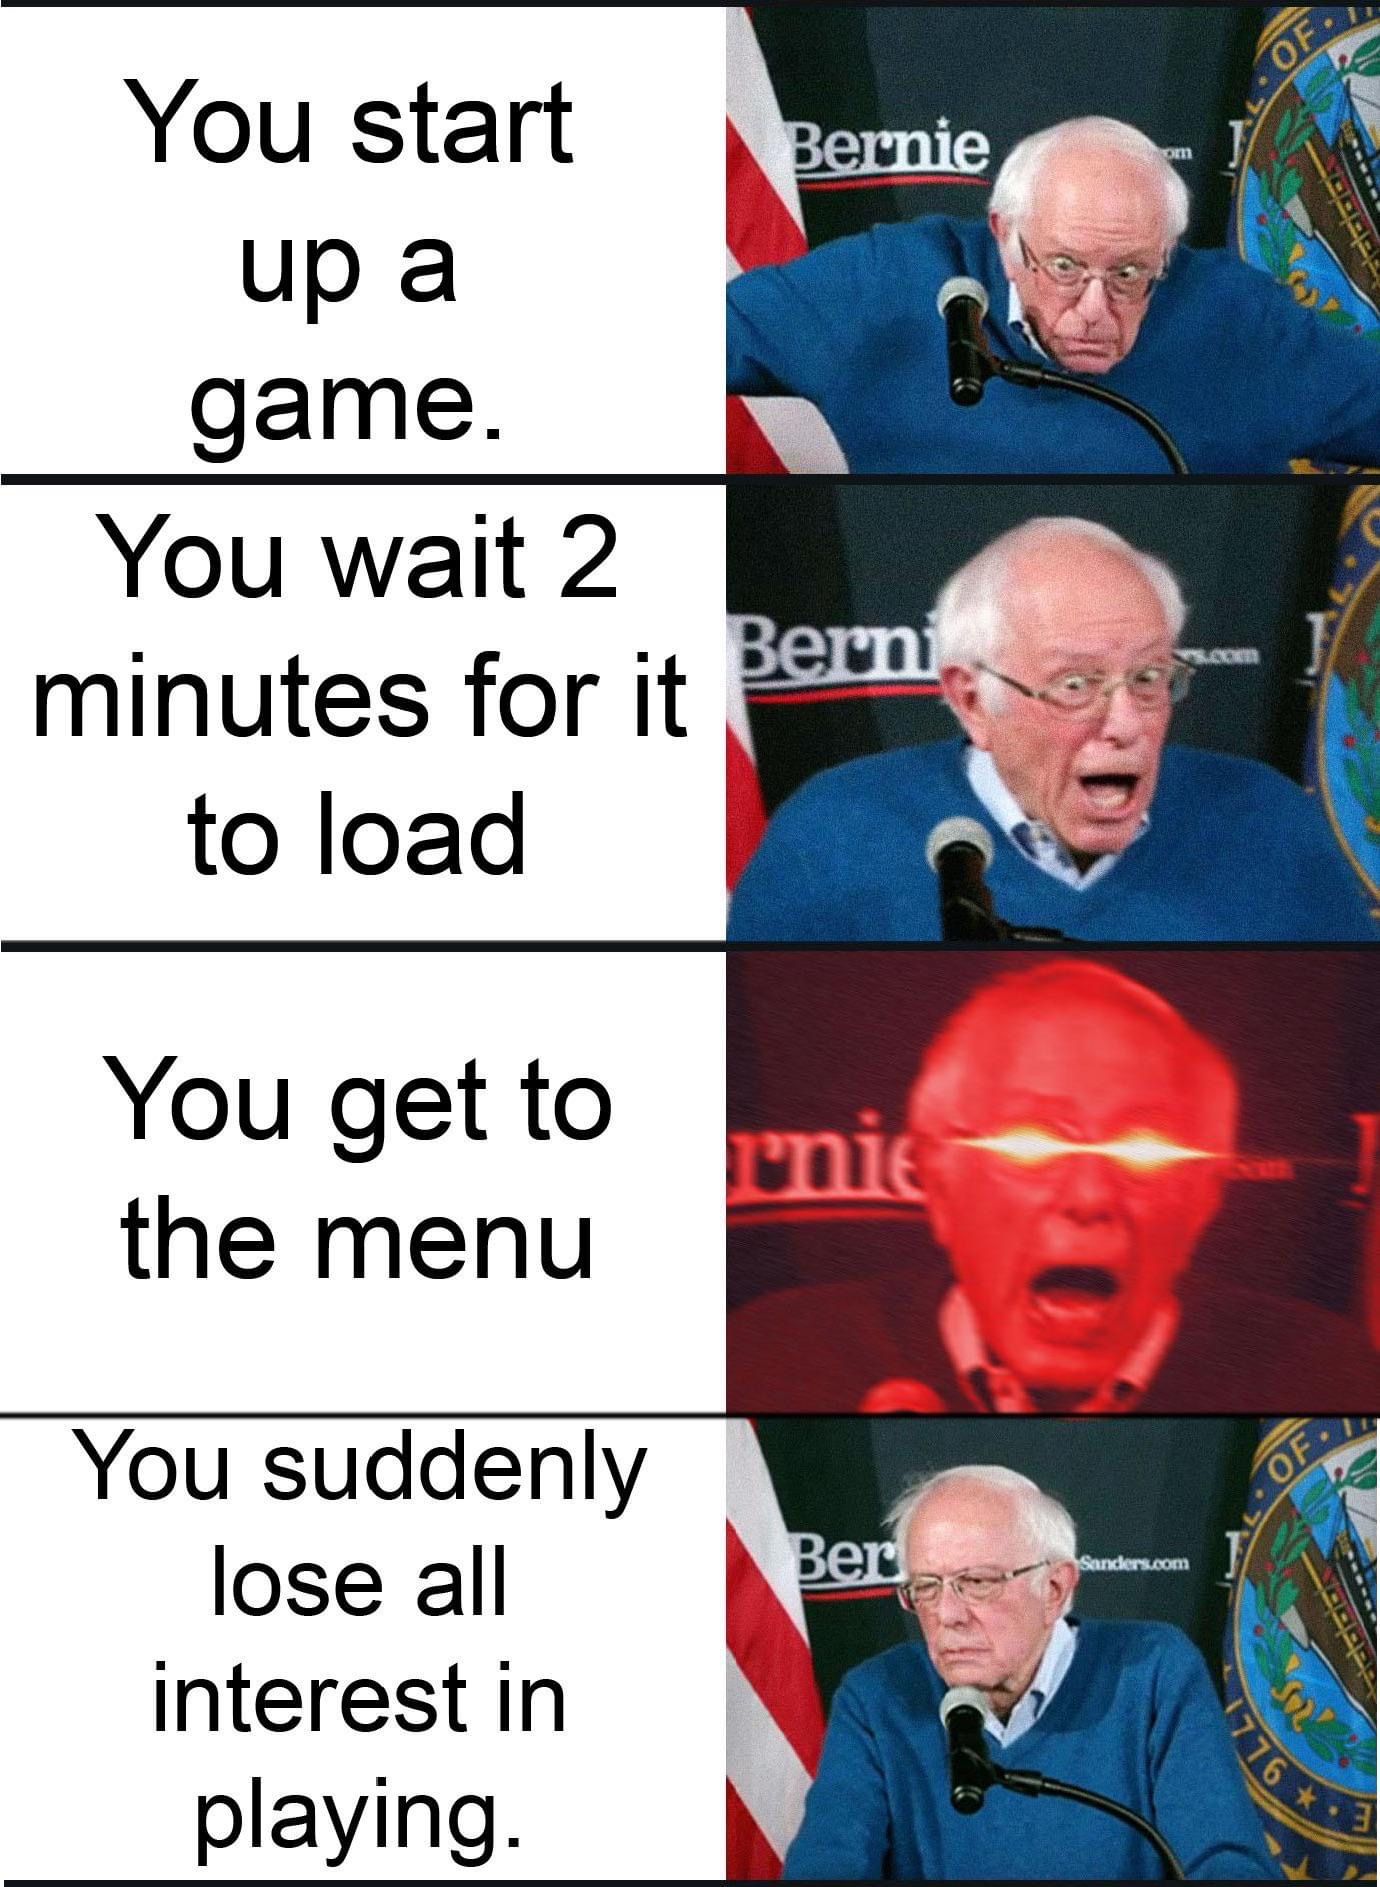 funny gaming memes - drista vs chris - Of. You start Bernie om up a game. You wait 2 Berni minutes for it to load You get to the menu nie 101 Ber Sanders.com You suddenly lose all interest in playing 1776 .2